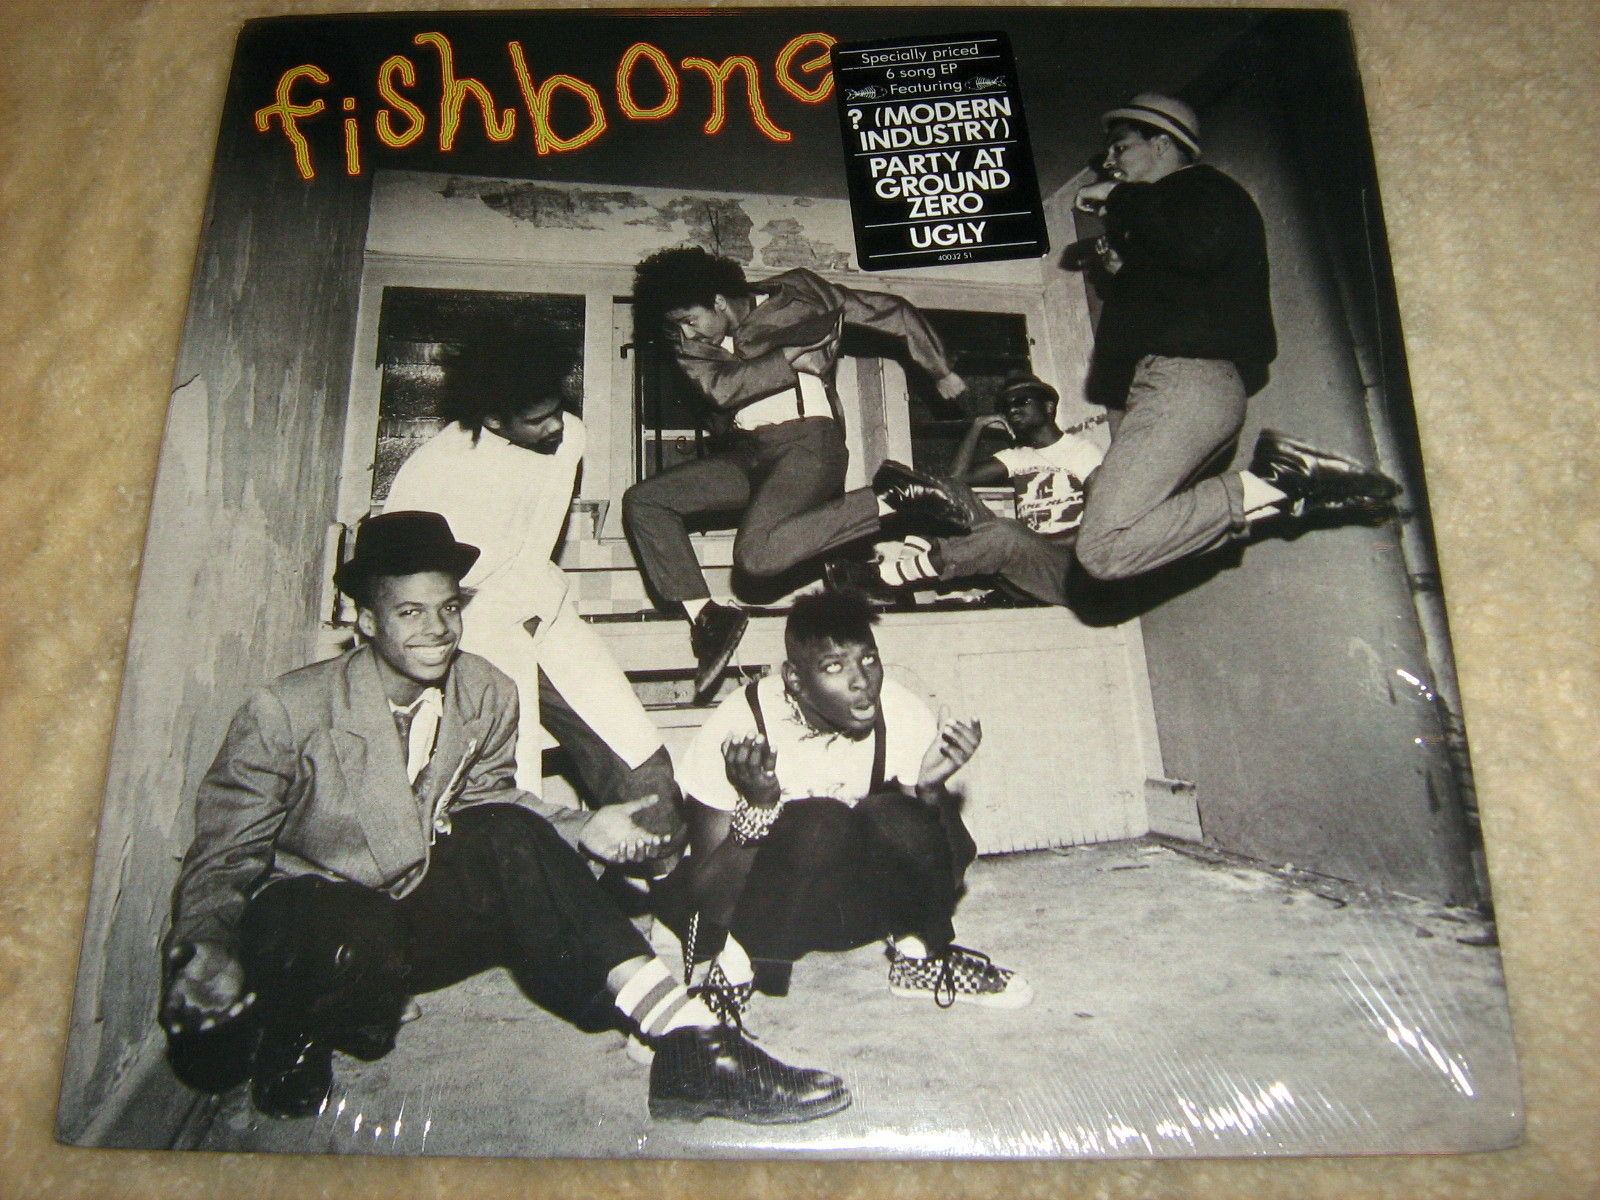  FISHBONE s/t debut self titled VINYL EP record 1985 album NM  in shrink wrap UGLY - auction details